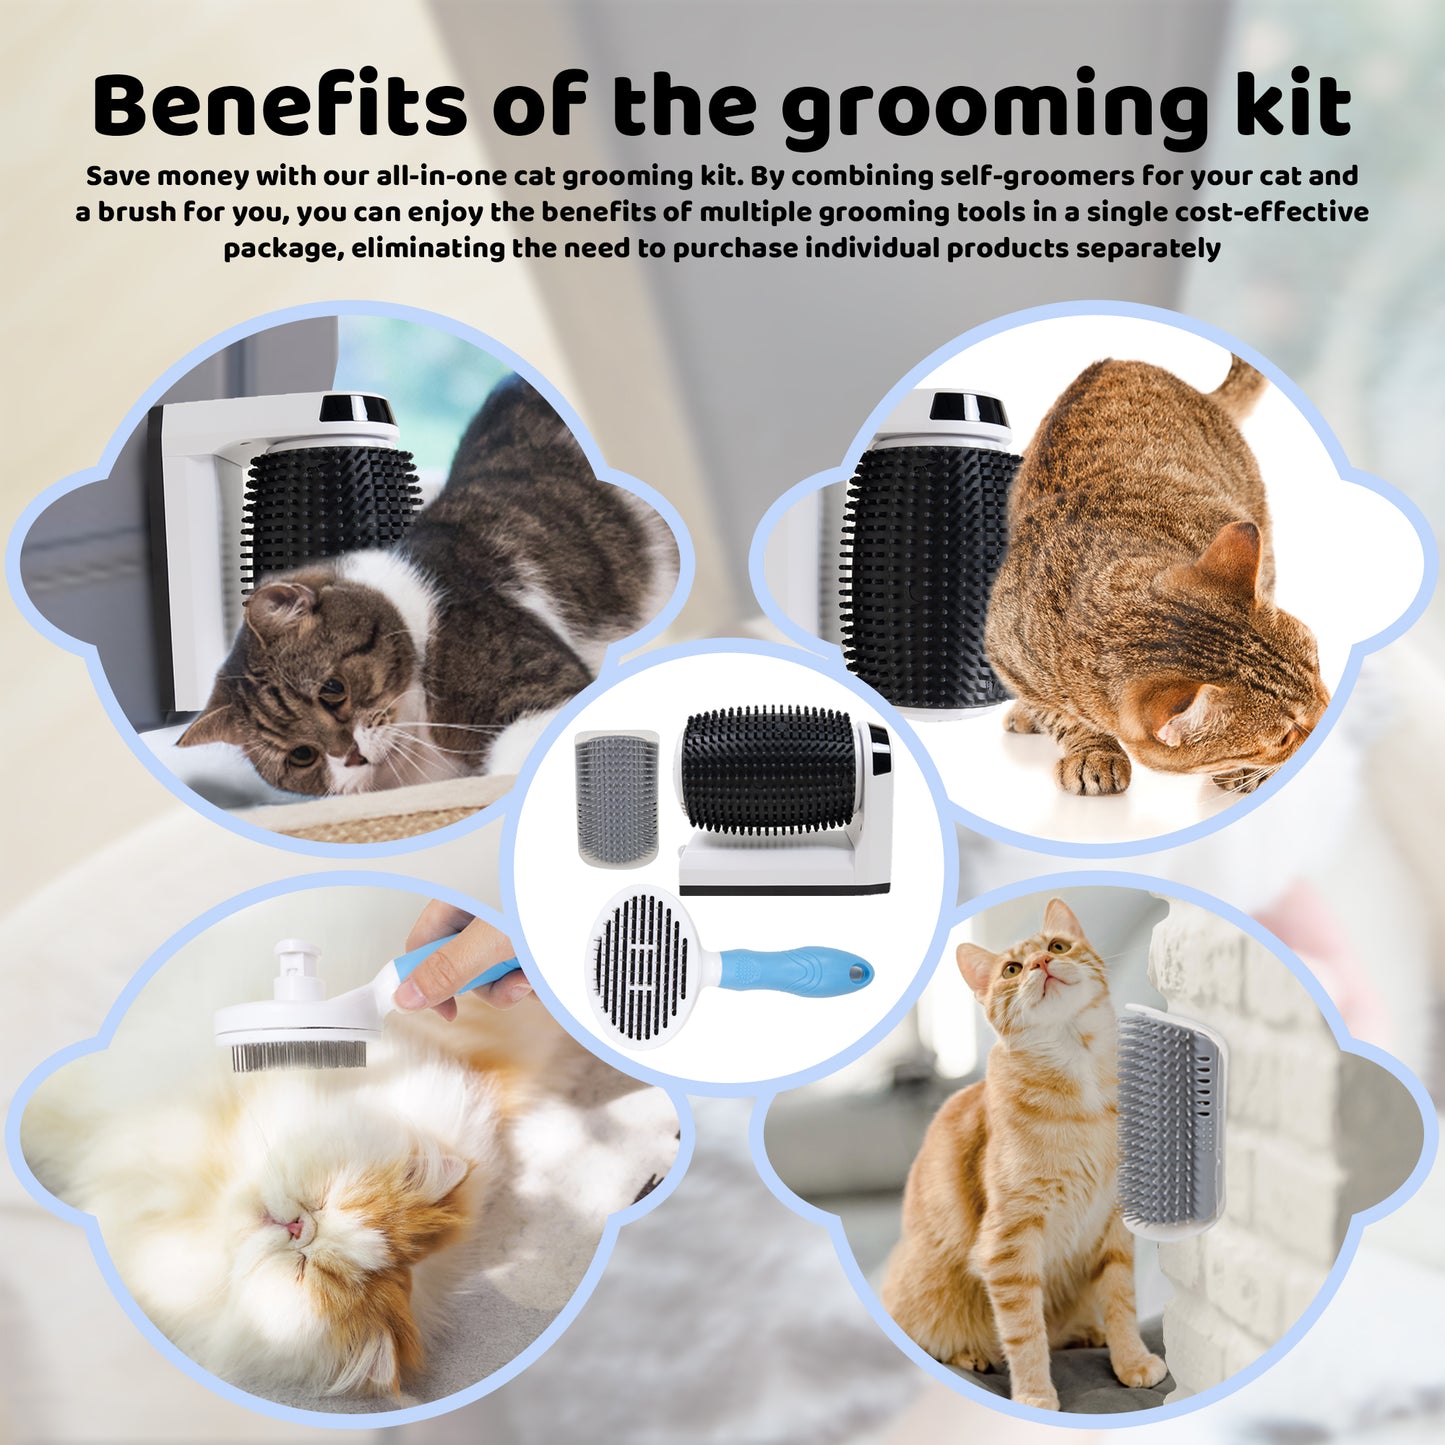 Complete Self-Grooming Kit for Cats: Three wall-mounted self groomers and a self-cleaning brush. Pamper your feline friends and reduce shedding effortlessly.